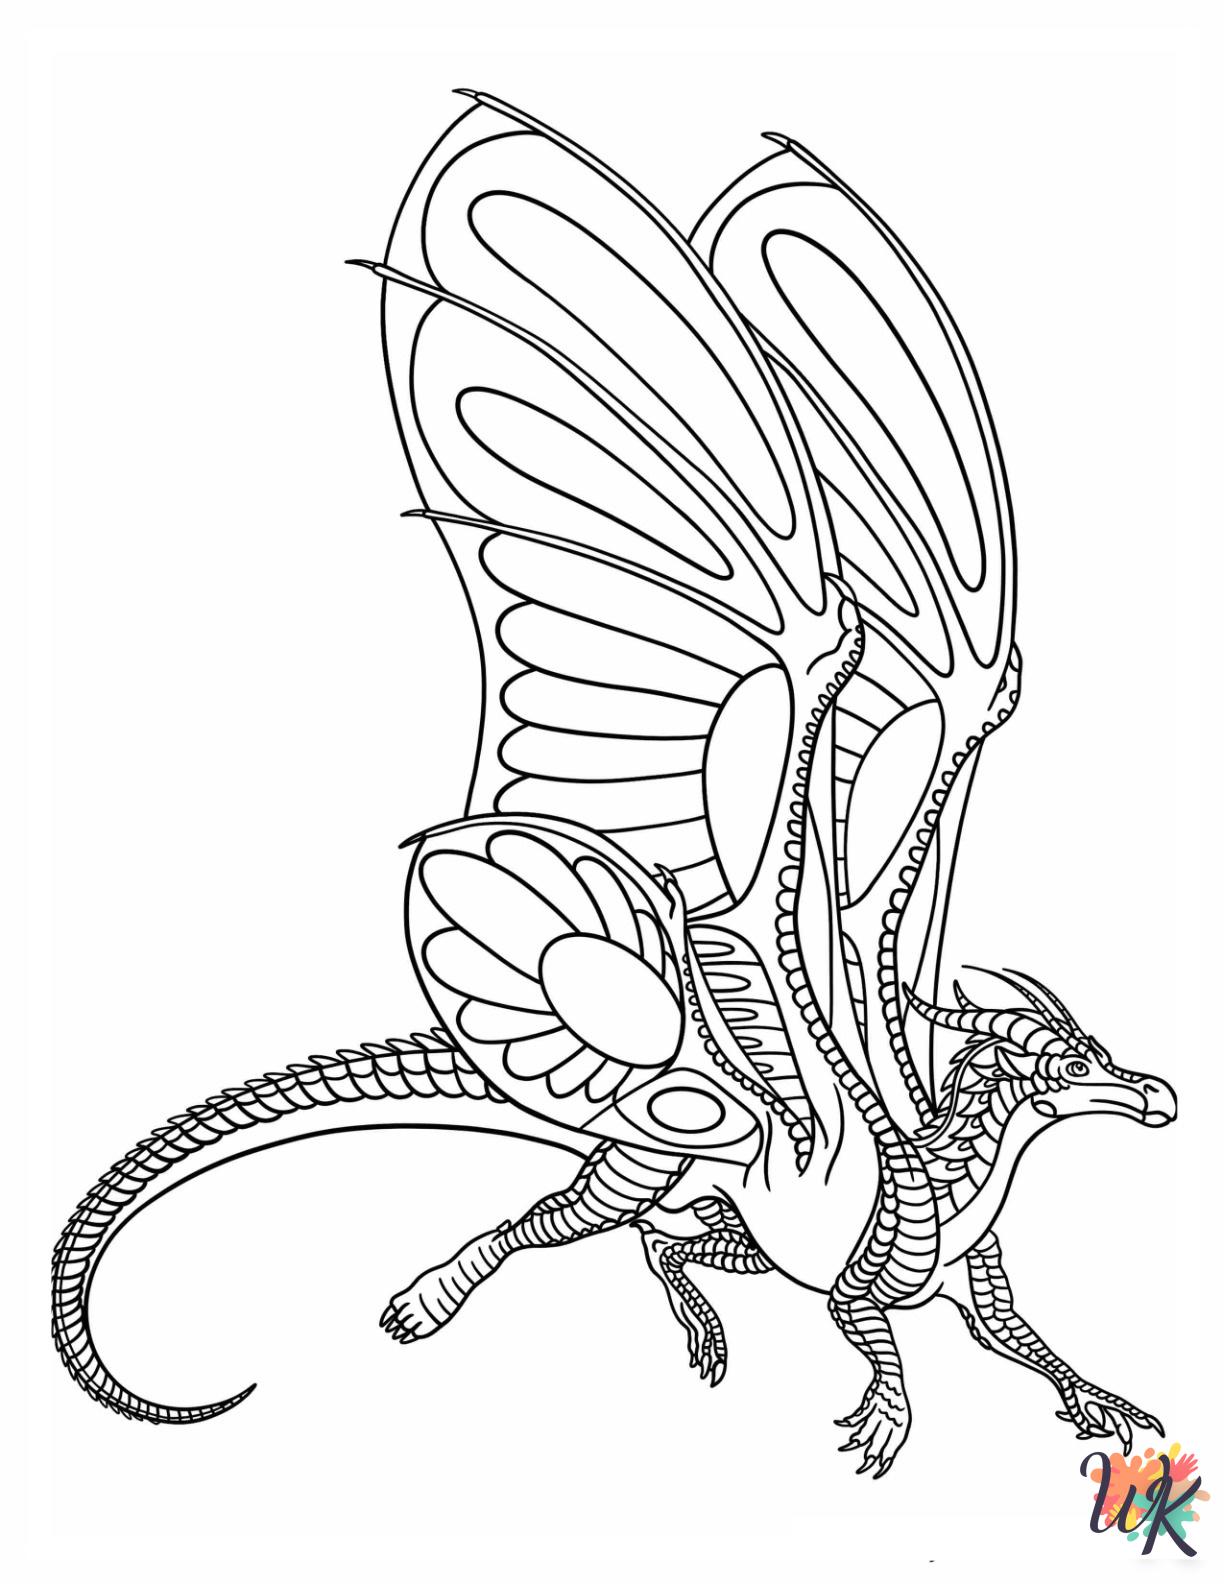 Wings Of Fire coloring pages easy